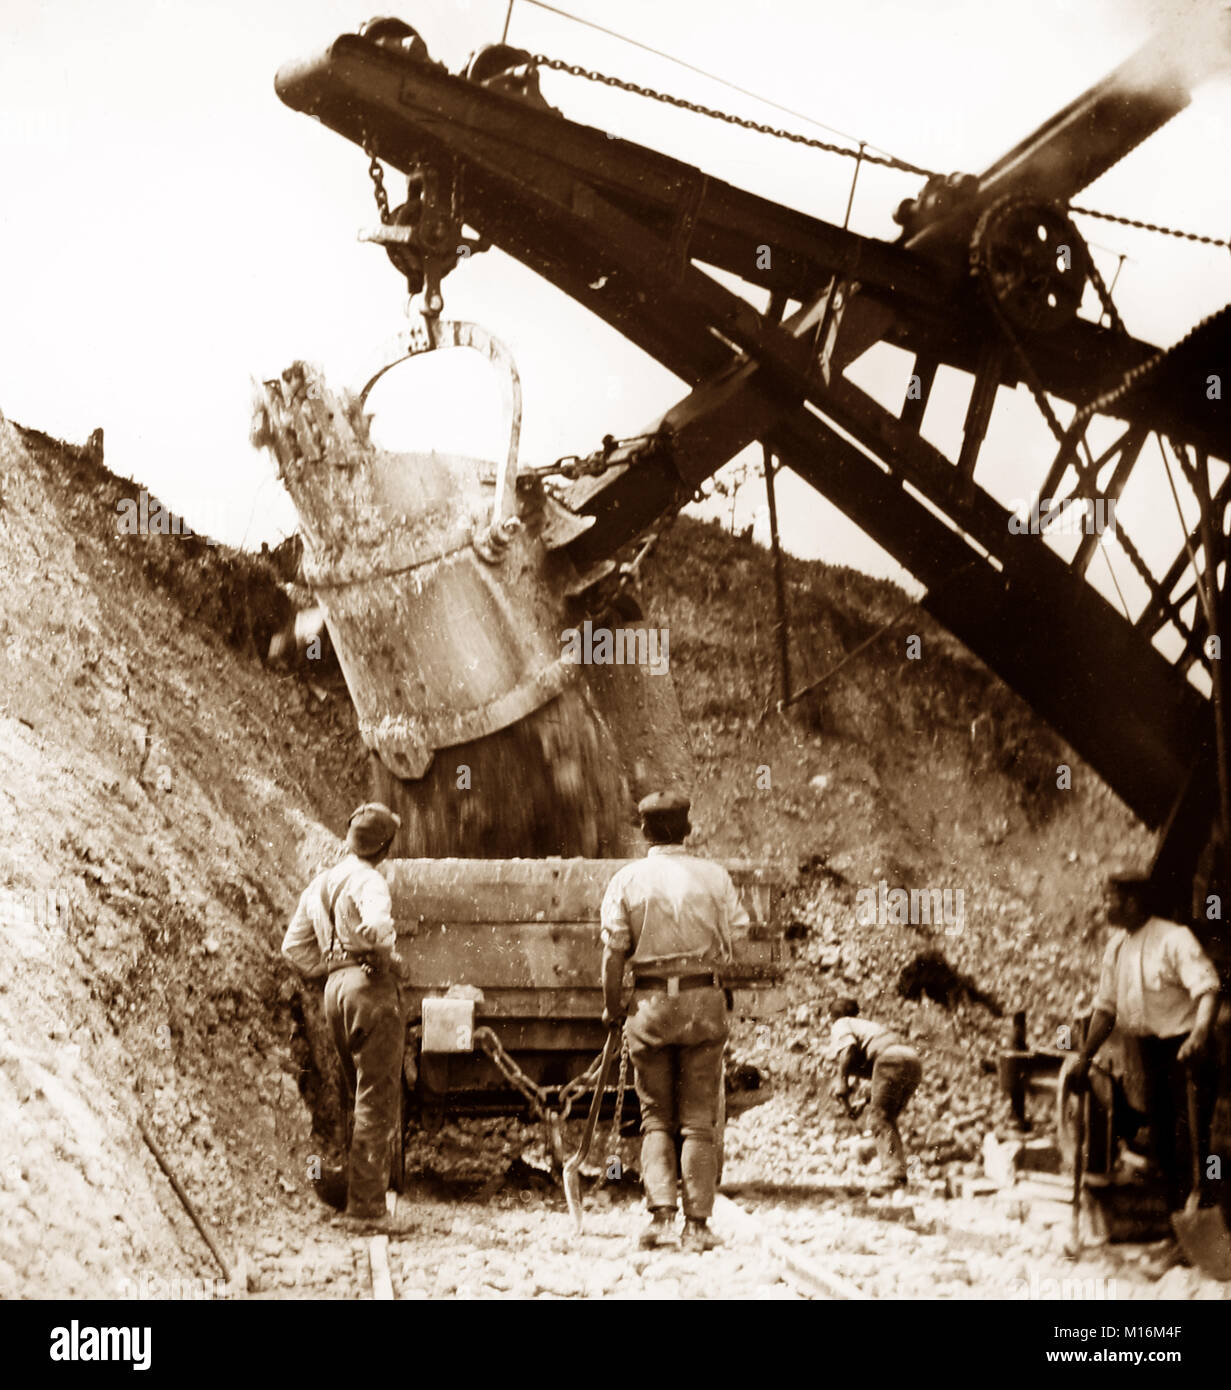 Navvies building a railway line in the UK, early 1900s Stock Photo